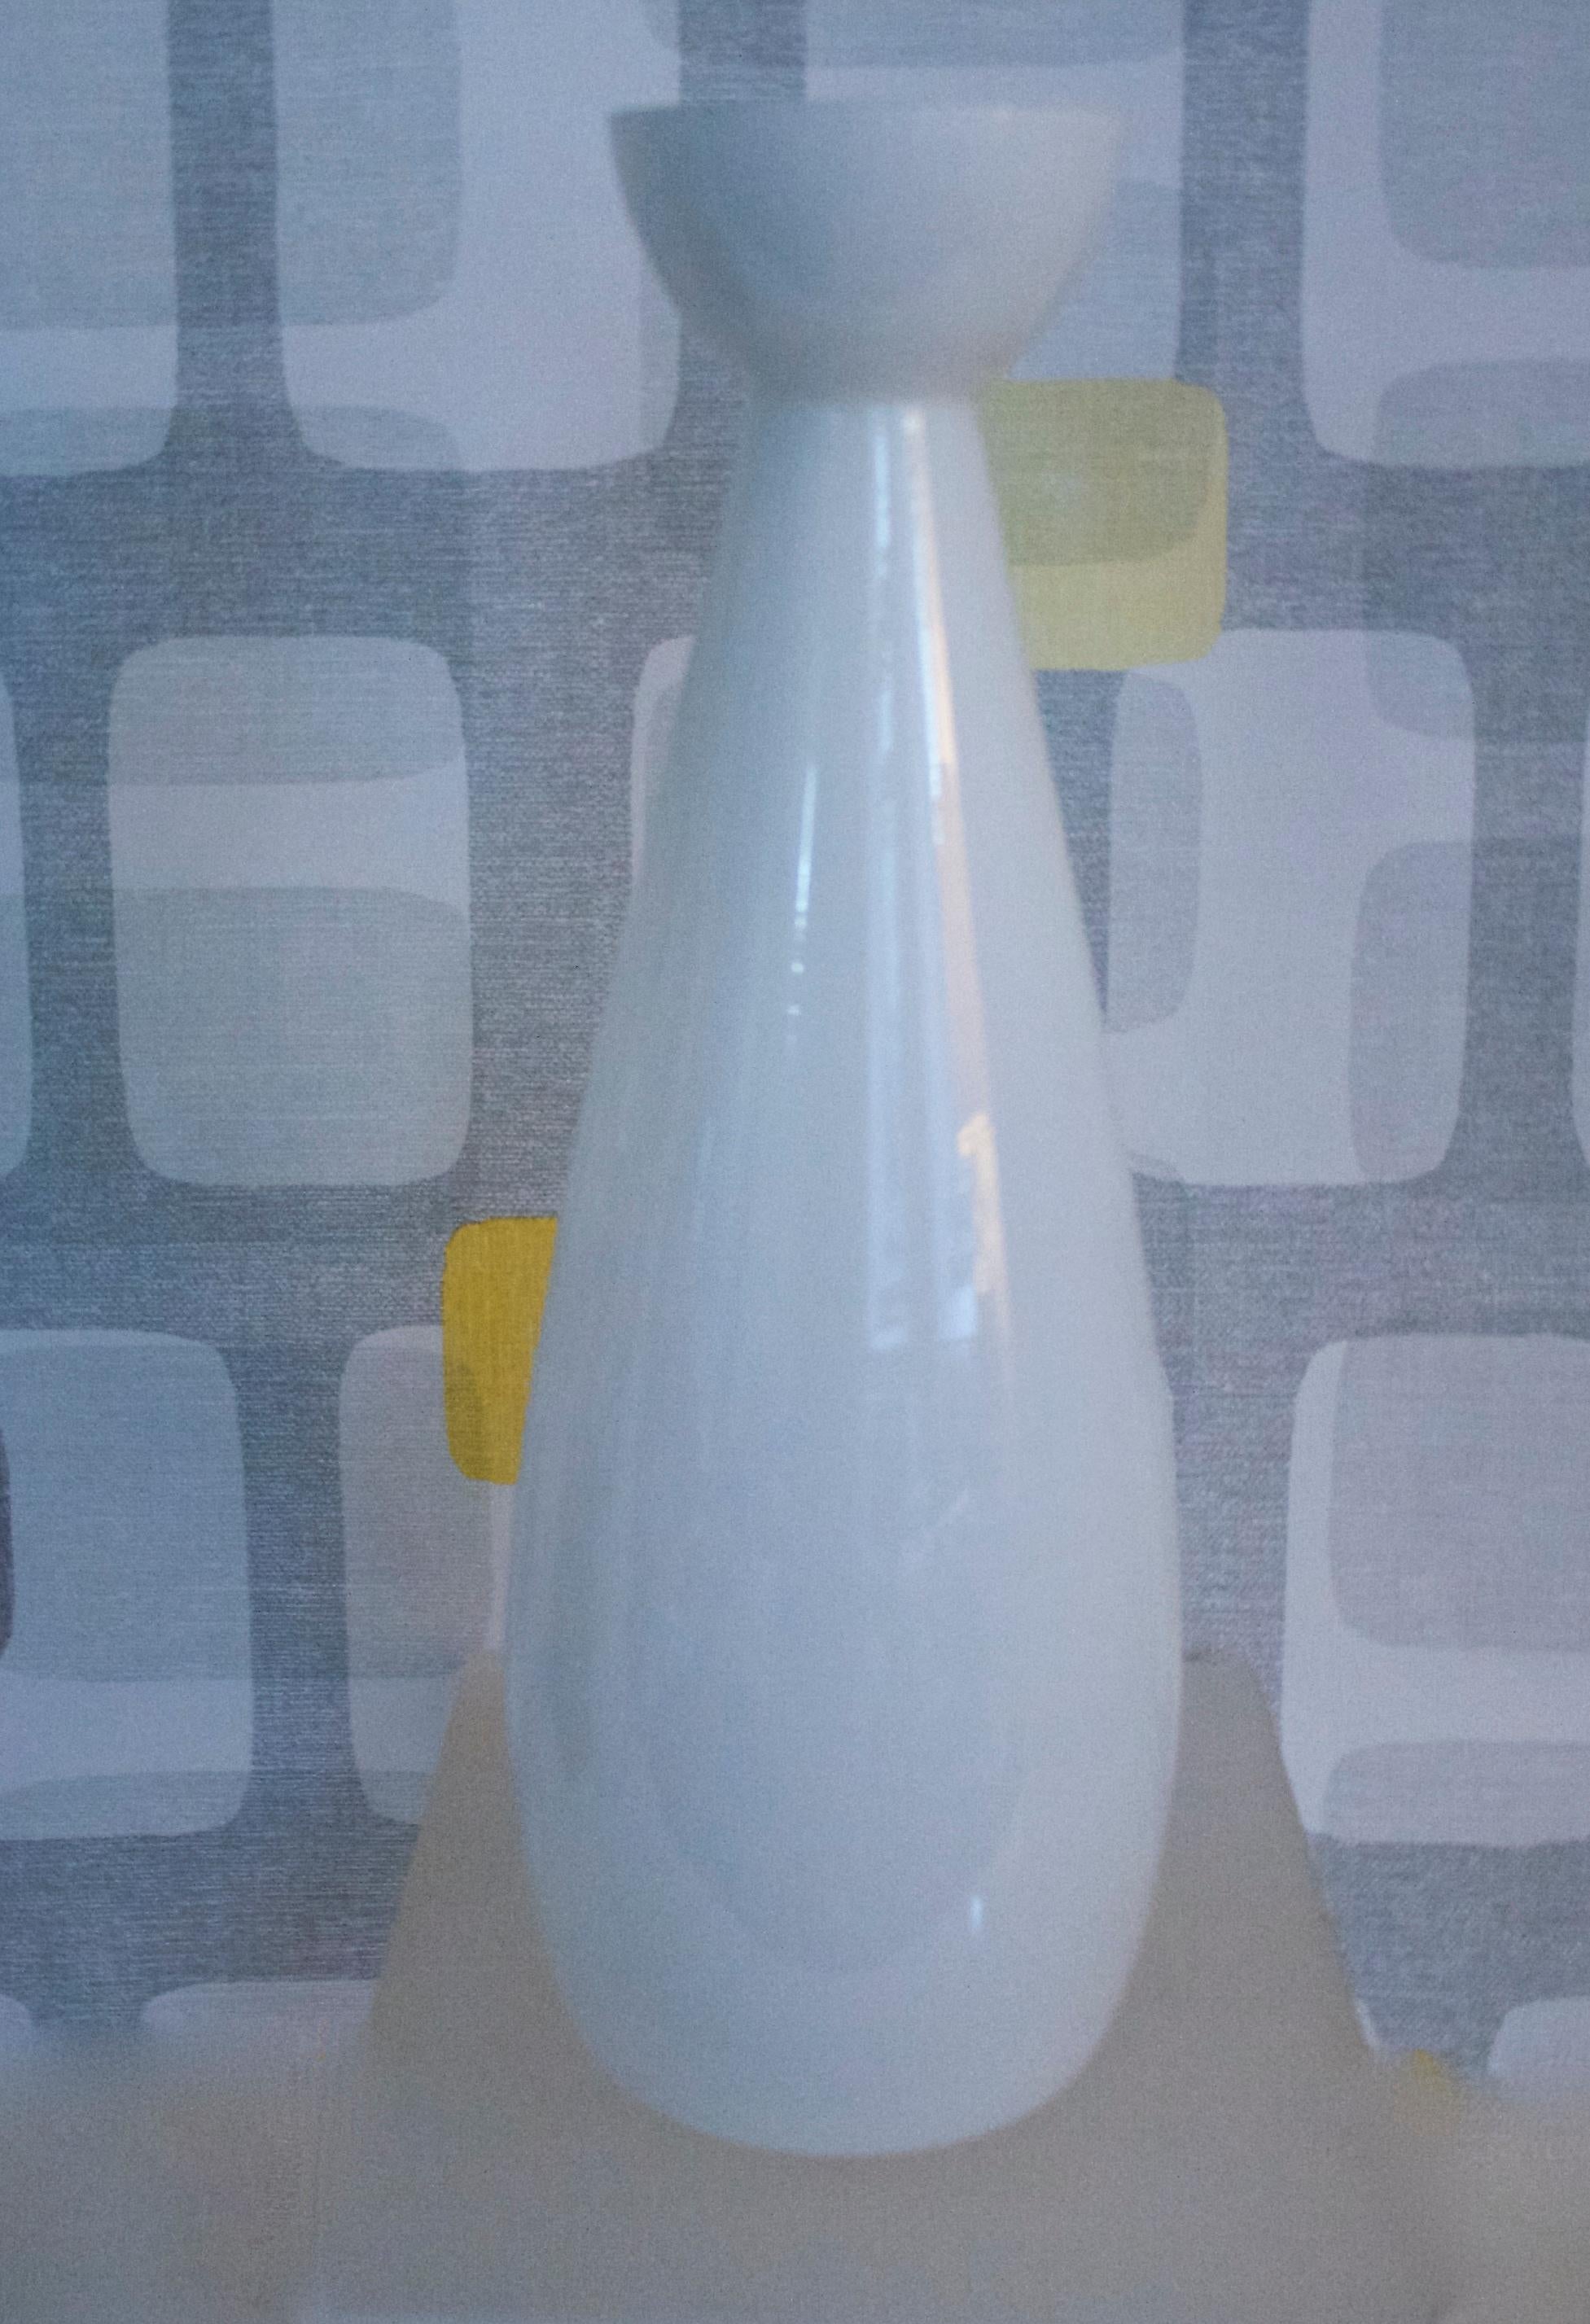 Modernist Scandinavian/Murano Space Age White Glass Vases from Late 1950s-1960s For Sale 3